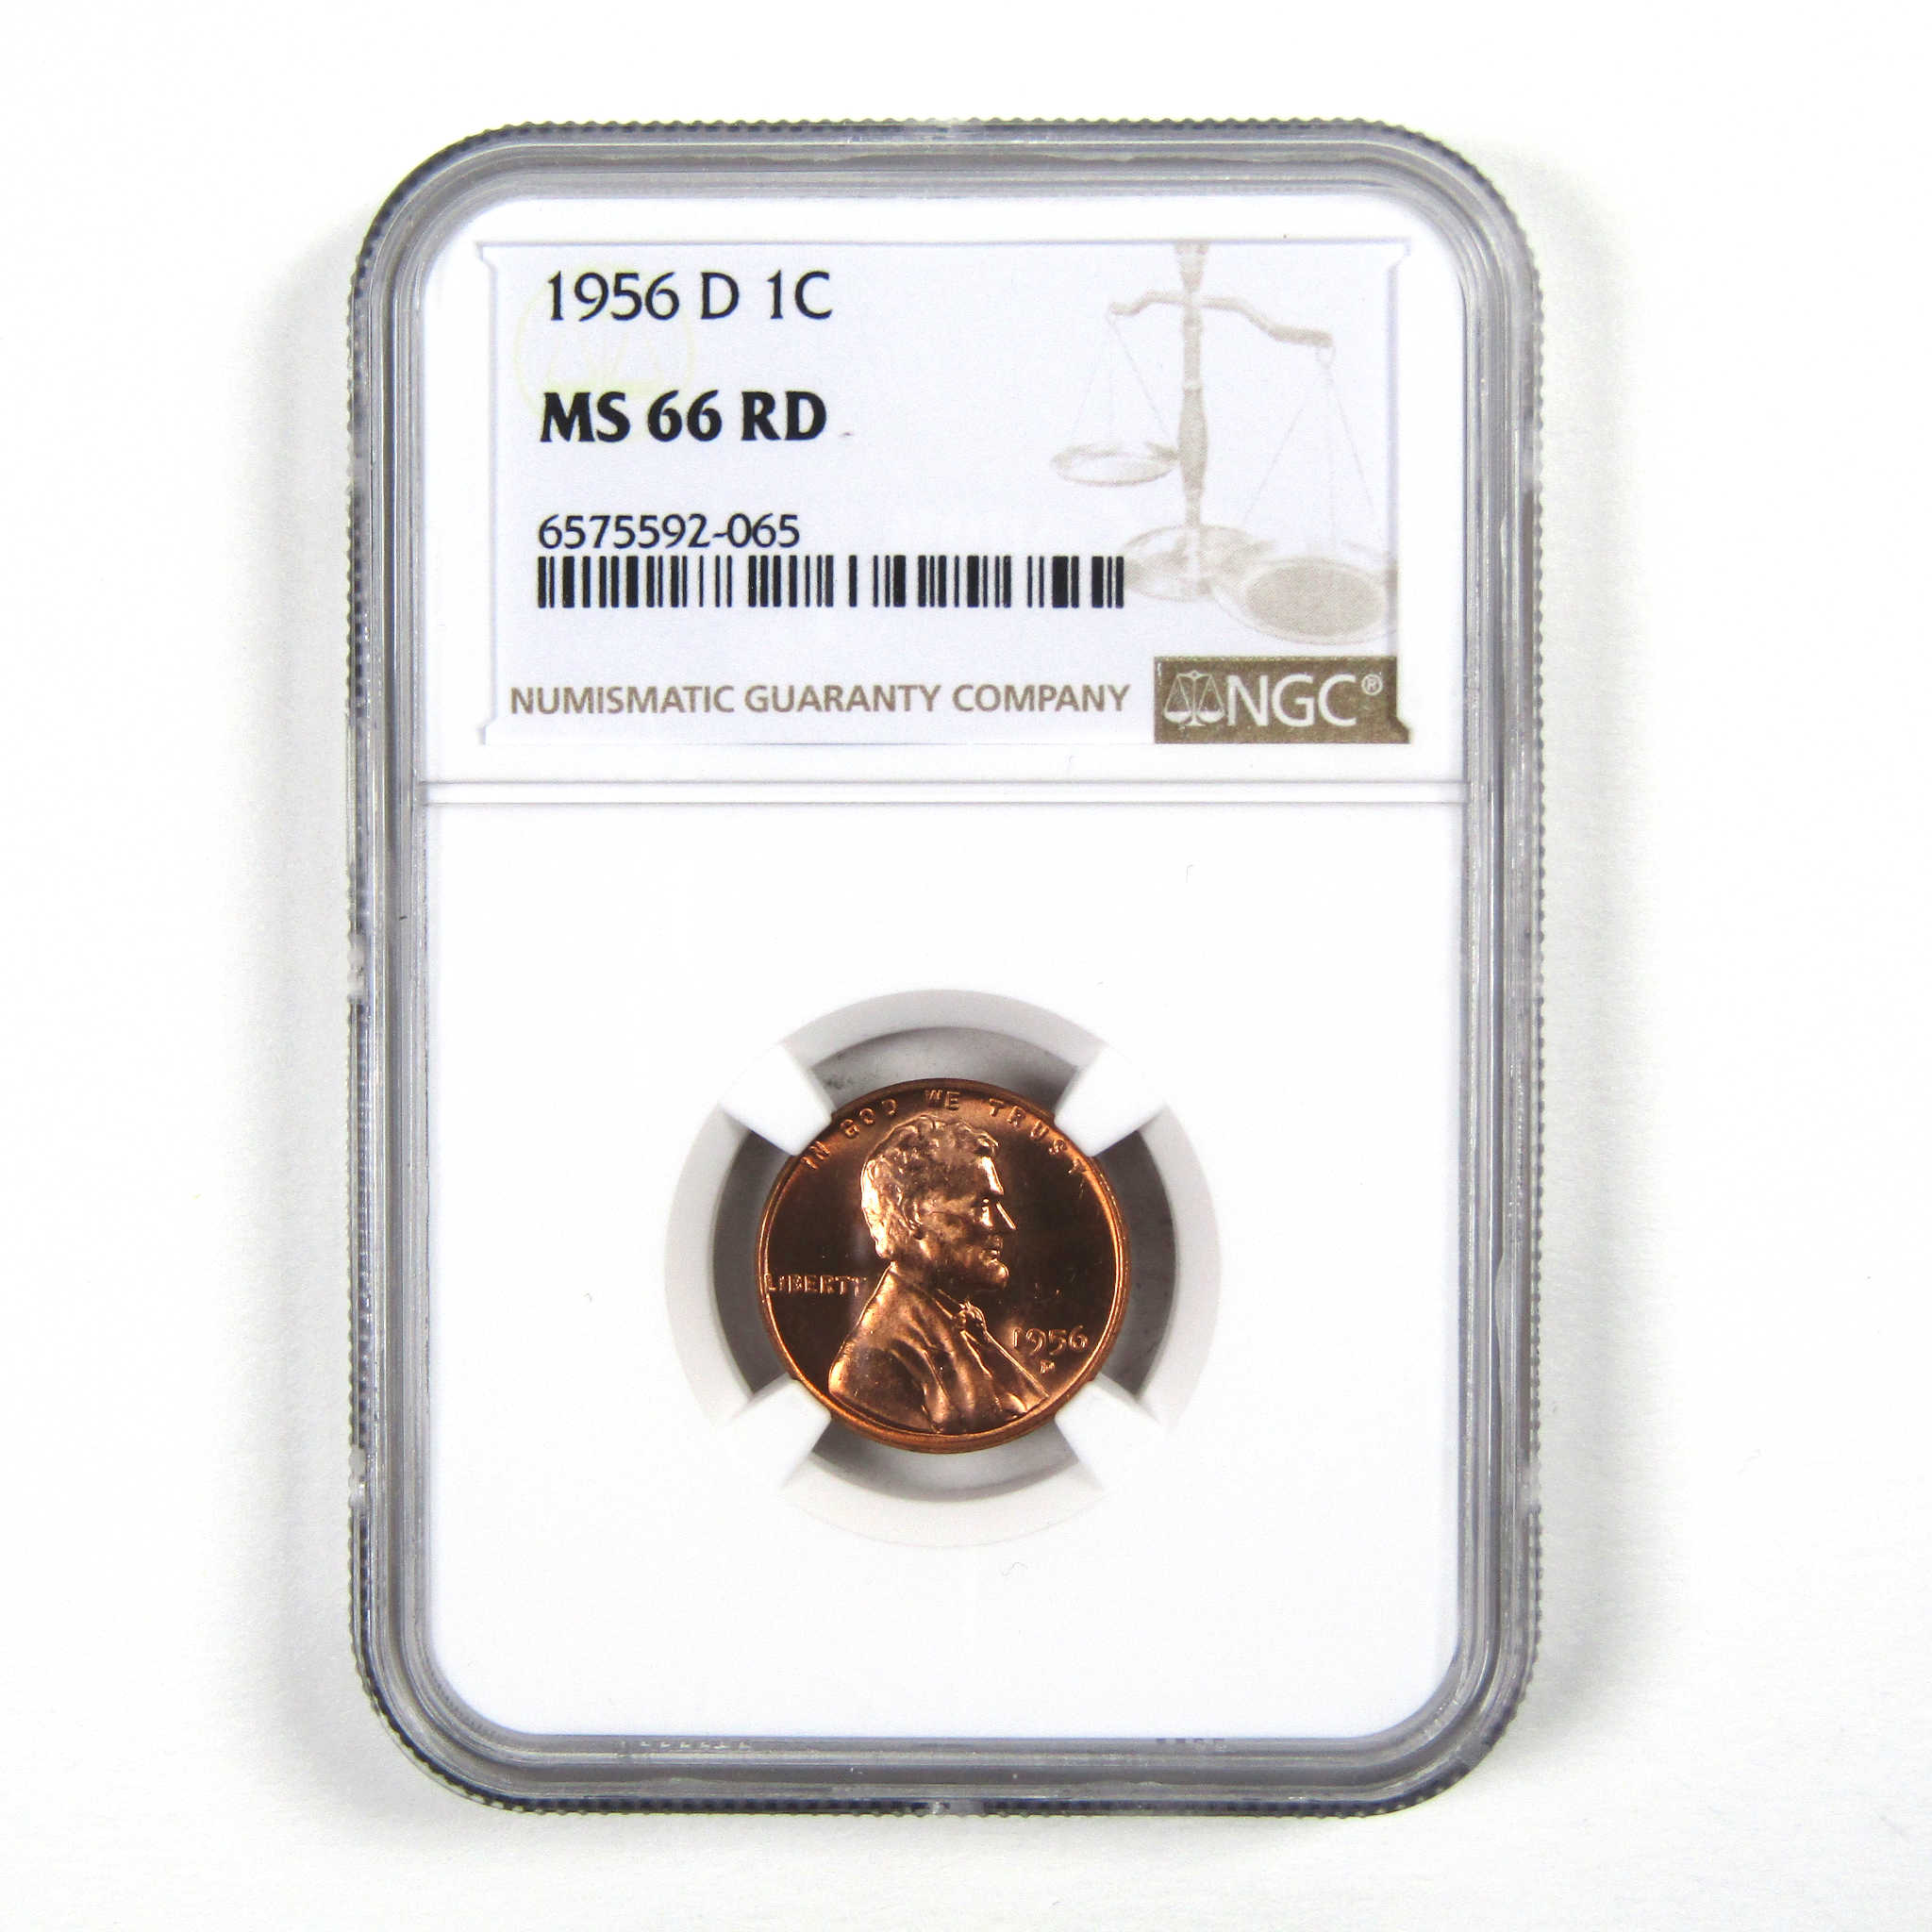 1956 D Lincoln Wheat Cent MS 66 RD NGC Penny Uncirculated SKU:I3656